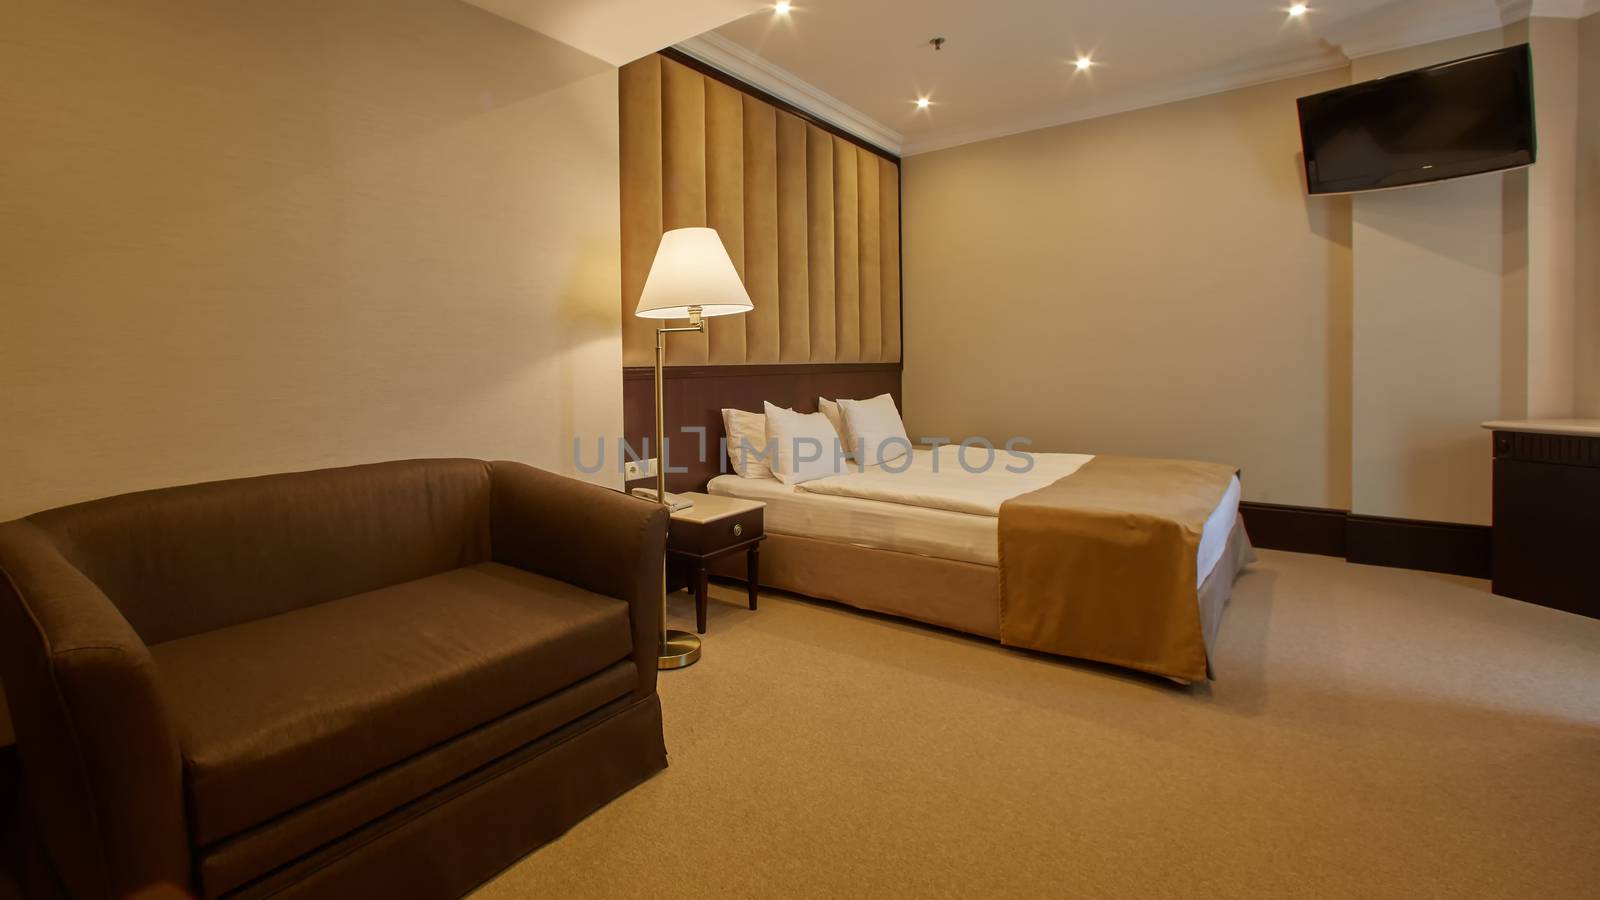 The modern interior of double bed room